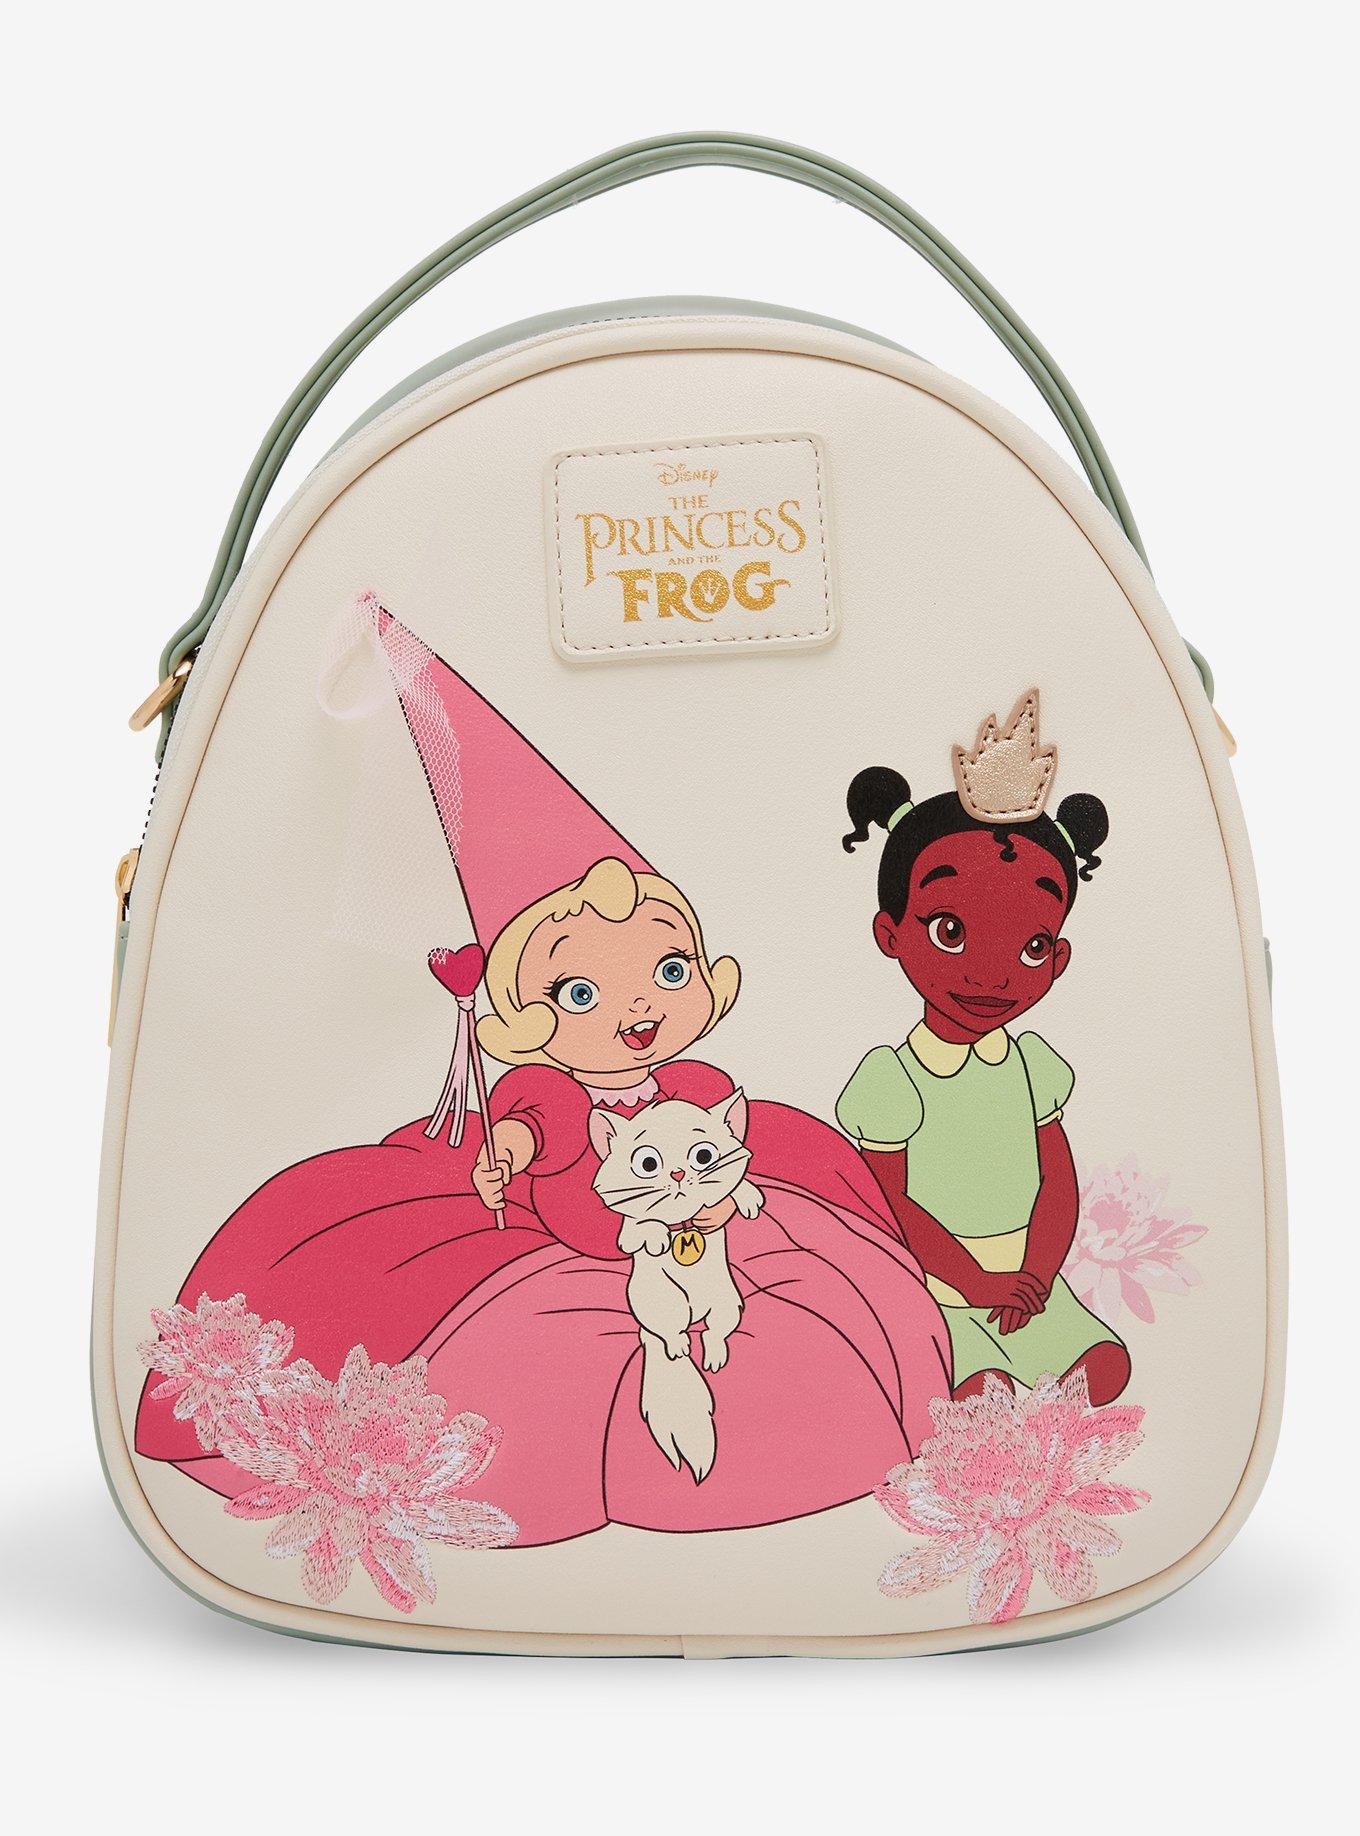 Princess Character Authentic Licensed Pink Lunch bag with Water Bottle